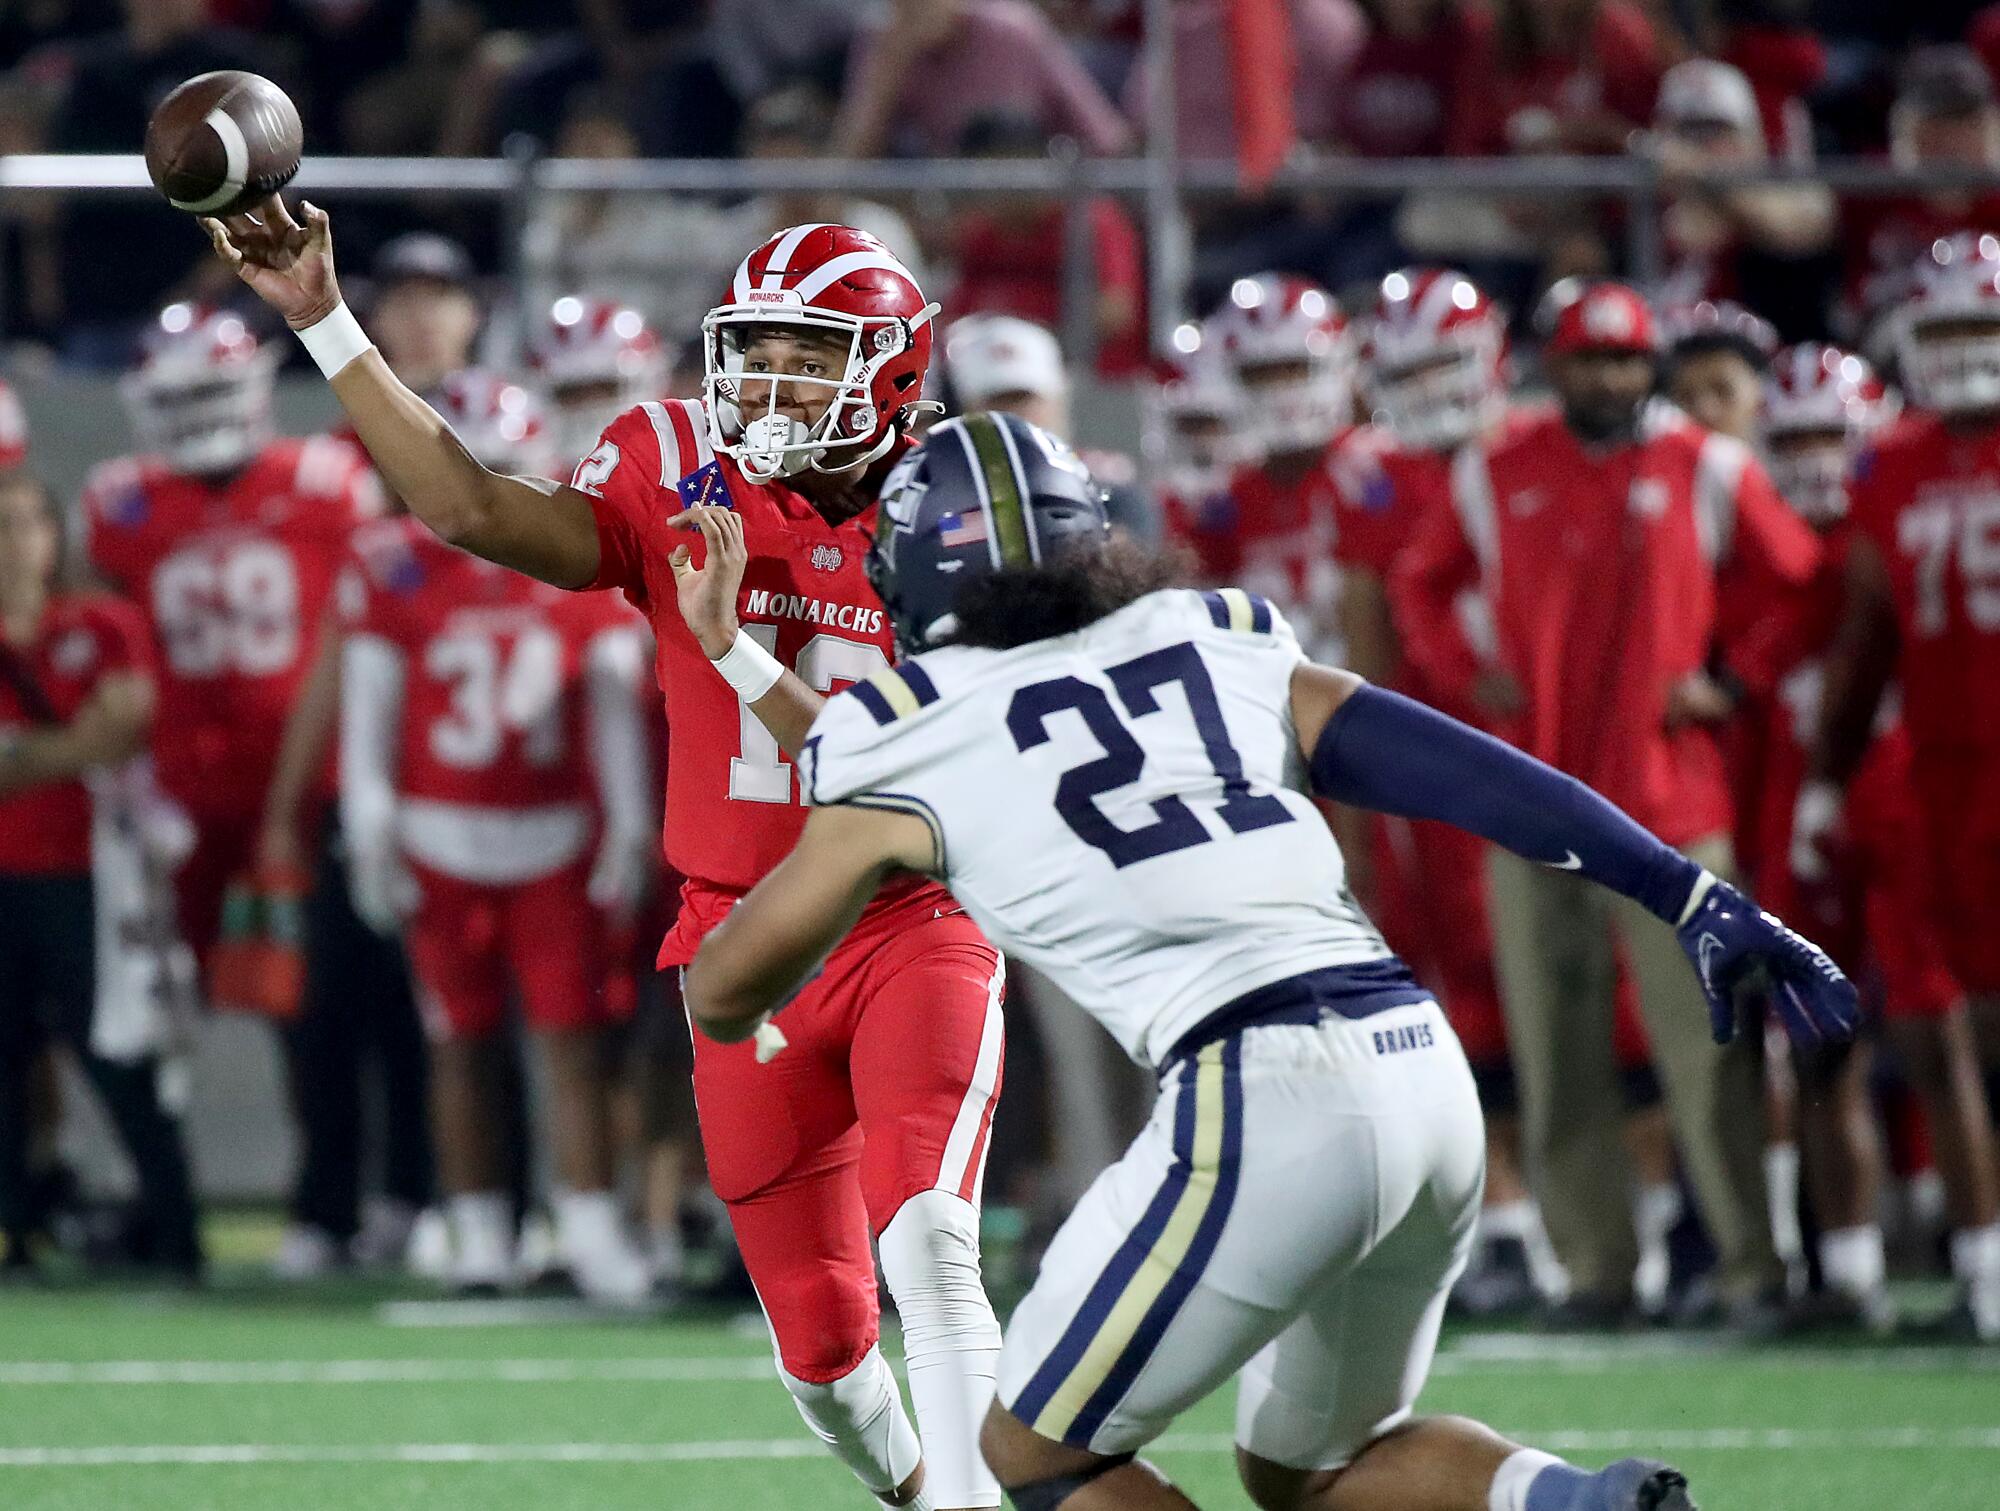 Mater Dei's quarterback throws a pass in front of a St. John Bosco player 